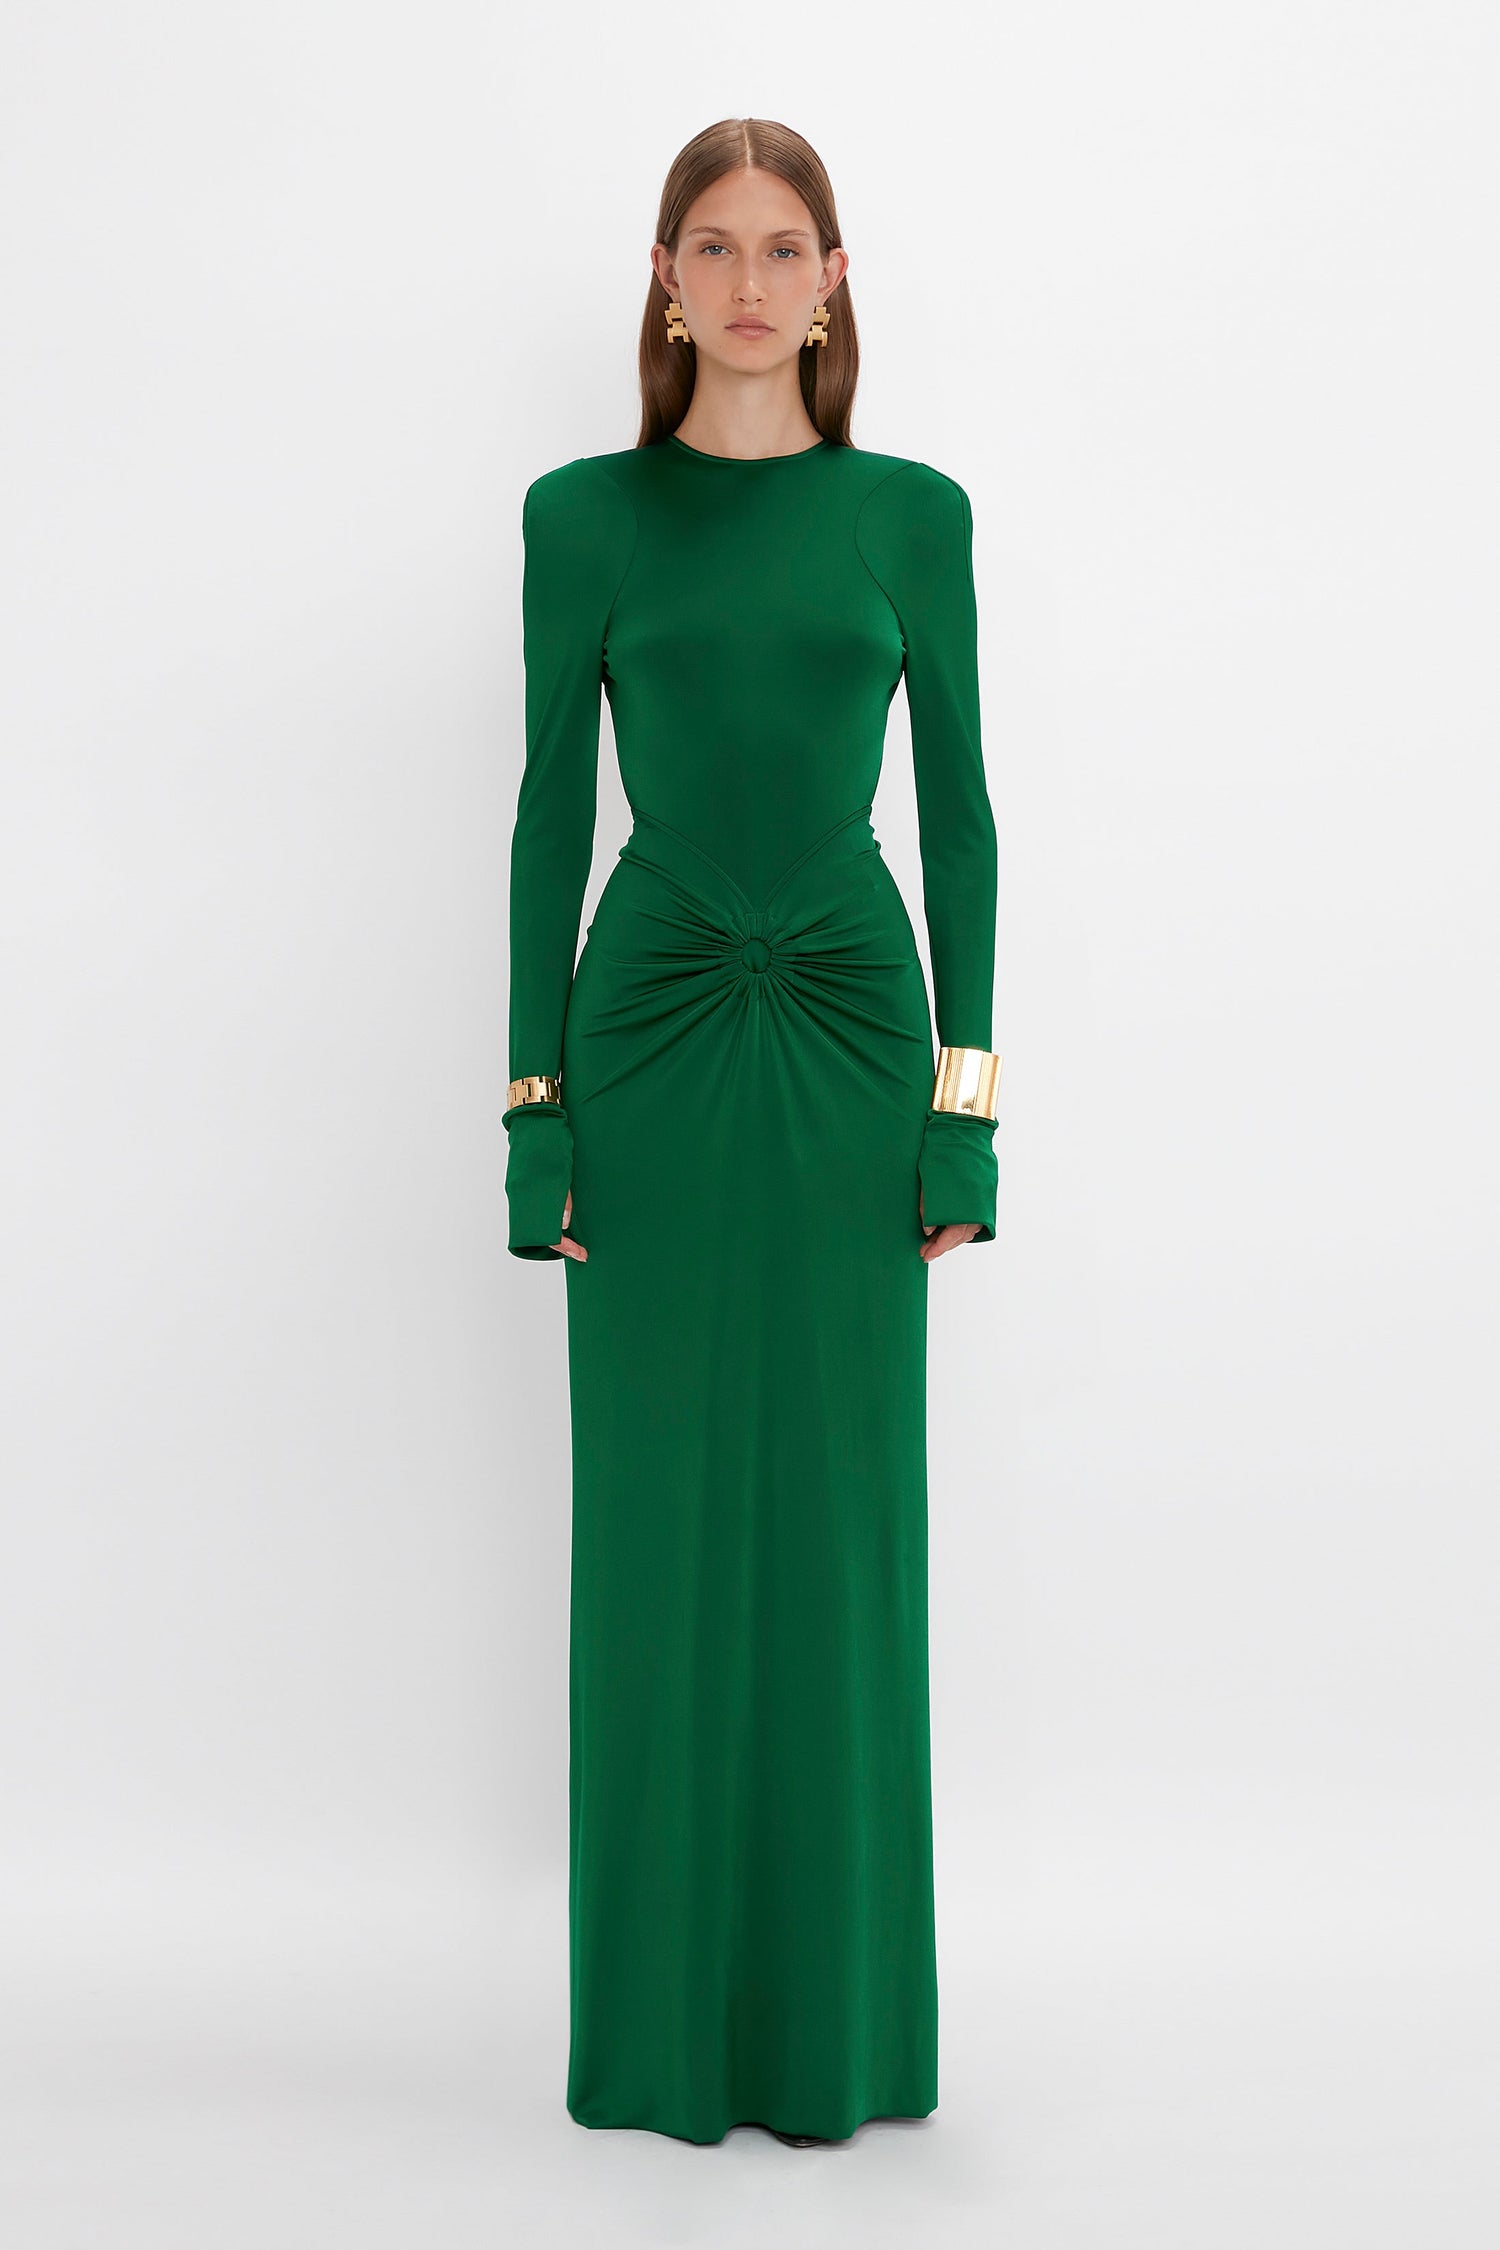 A woman in a long, emerald green dress stands against a plain white background. The Circle Detail Open Back Gown In Emerald by Victoria Beckham, made of body-sculpting jersey, features long sleeves, a high neckline, and a ruched detail at the waist. She wears gold cuff bracelets.